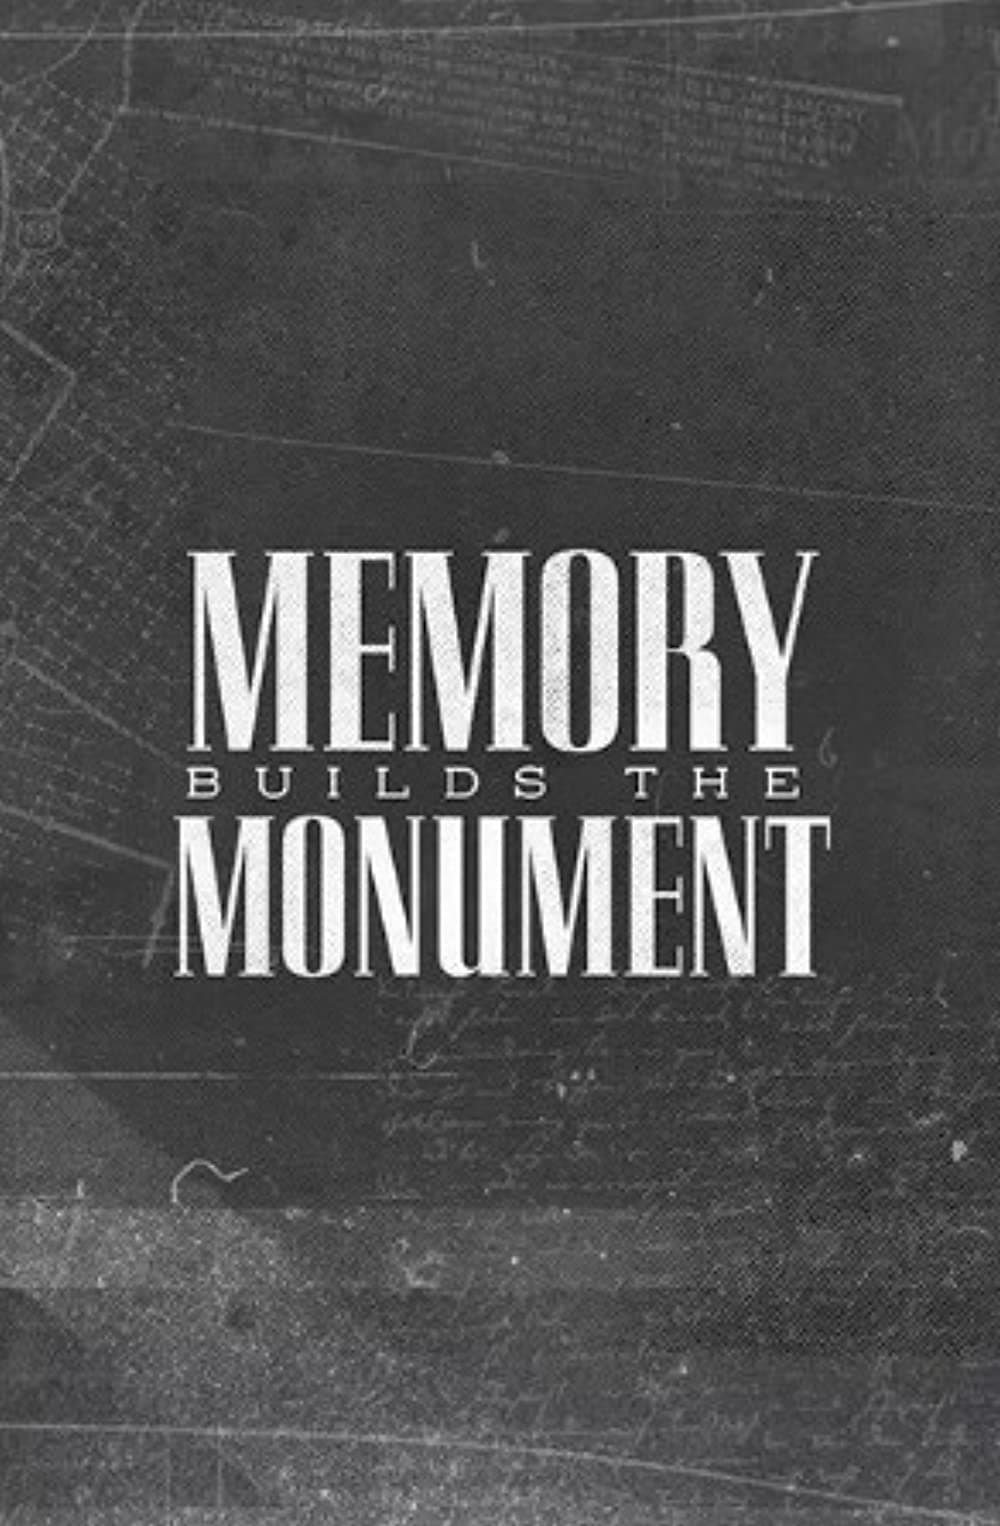 Memory Builds The Monument